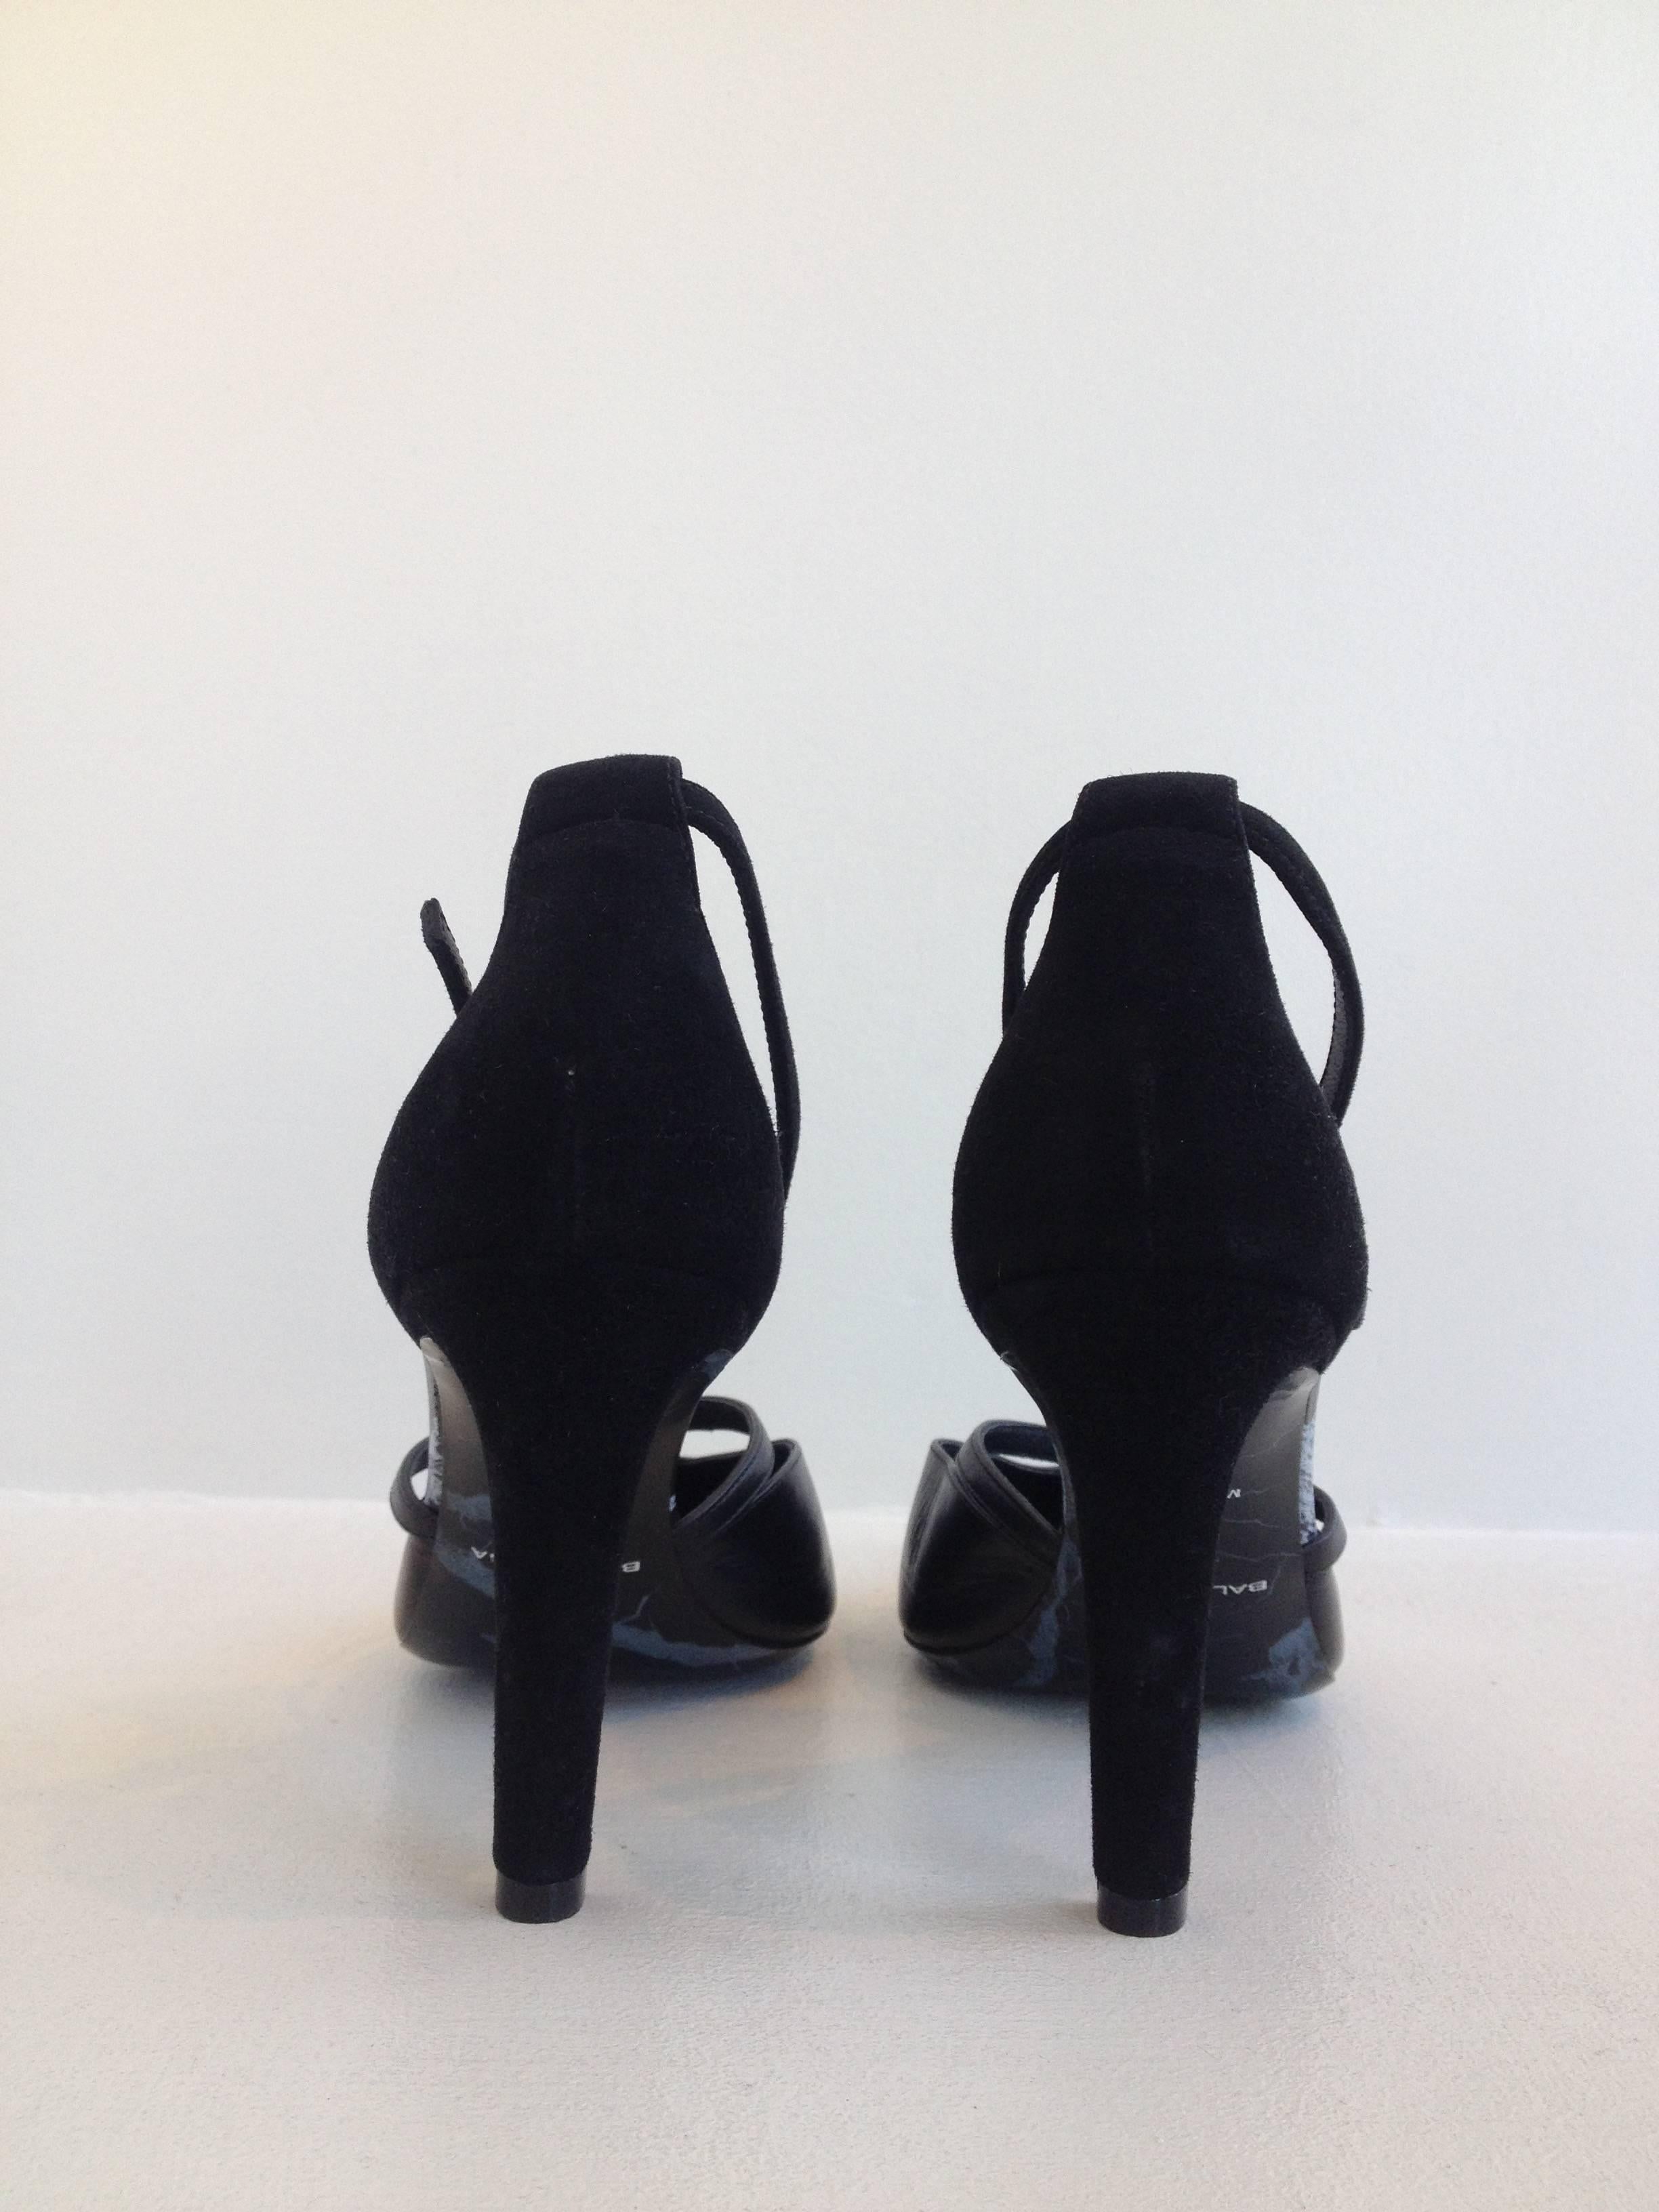 Balenciaga Black Suede and Leather Ankle Strap Heels Size 38 (7.5) In New Condition For Sale In San Francisco, CA